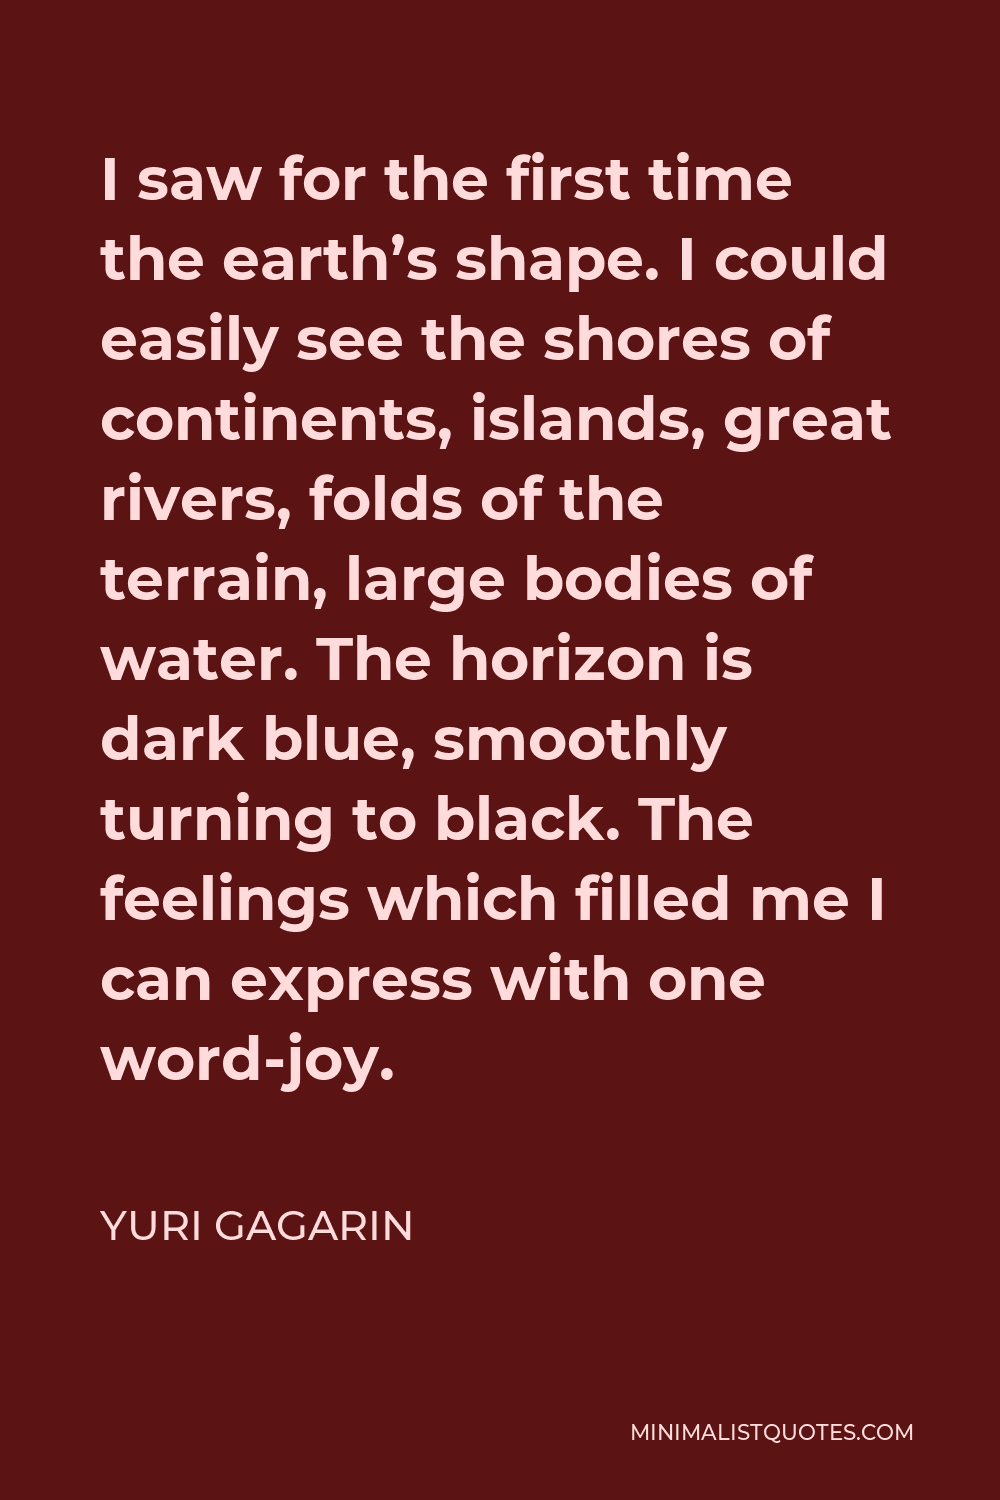 Yuri Gagarin Quote - I saw for the first time the earth’s shape. I could easily see the shores of continents, islands, great rivers, folds of the terrain, large bodies of water. The horizon is dark blue, smoothly turning to black. The feelings which filled me I can express with one word-joy.